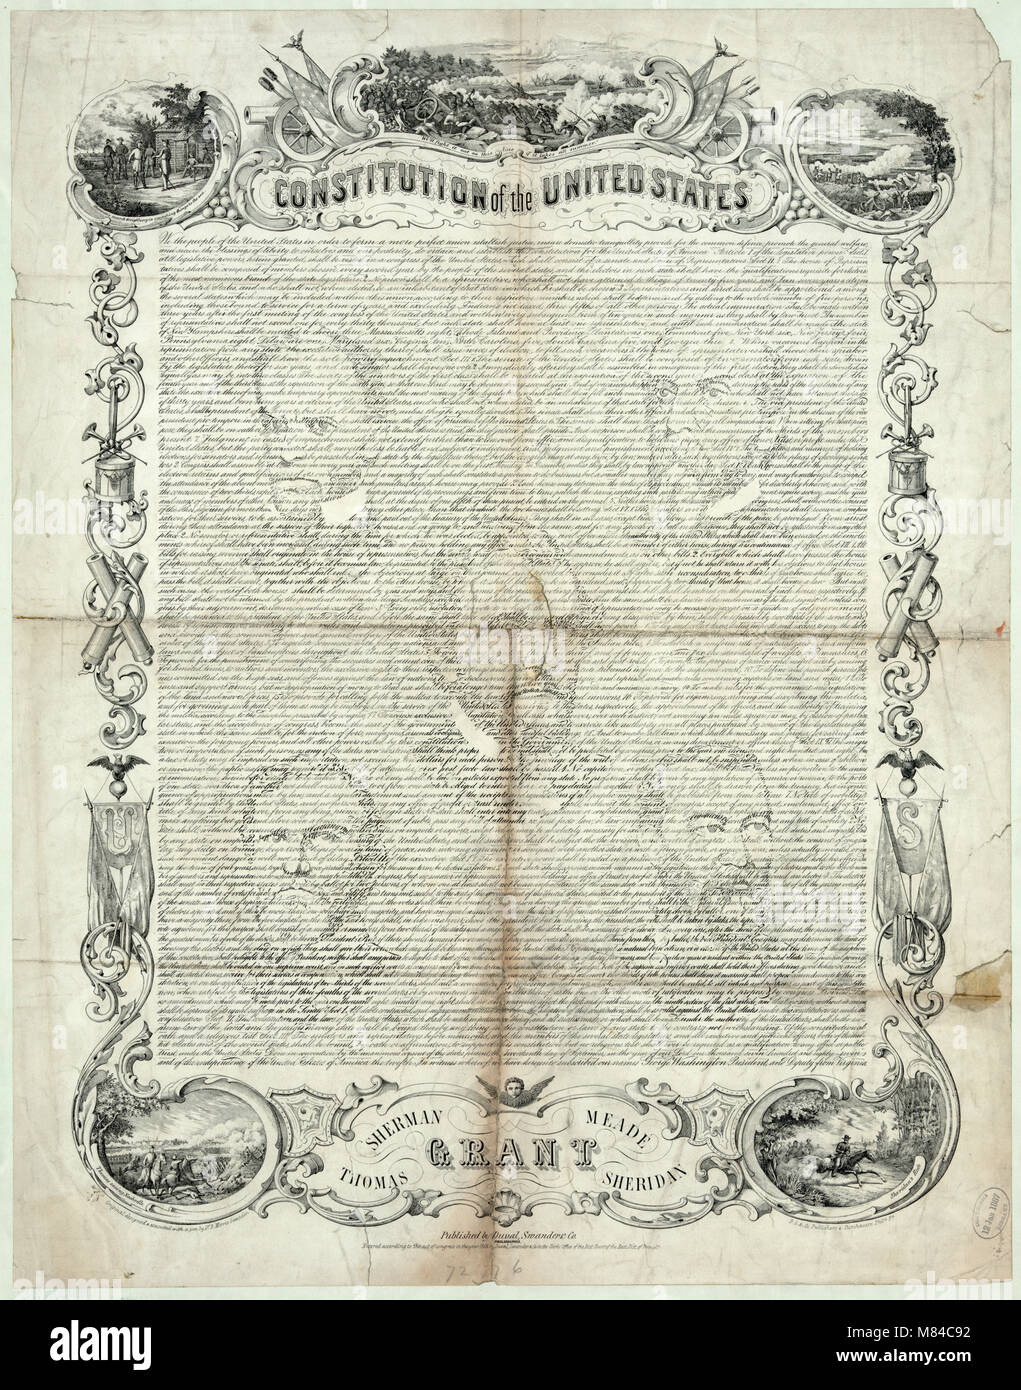 An 1866 copy of the United States Constitution with images of Civil War generals. Stock Photo